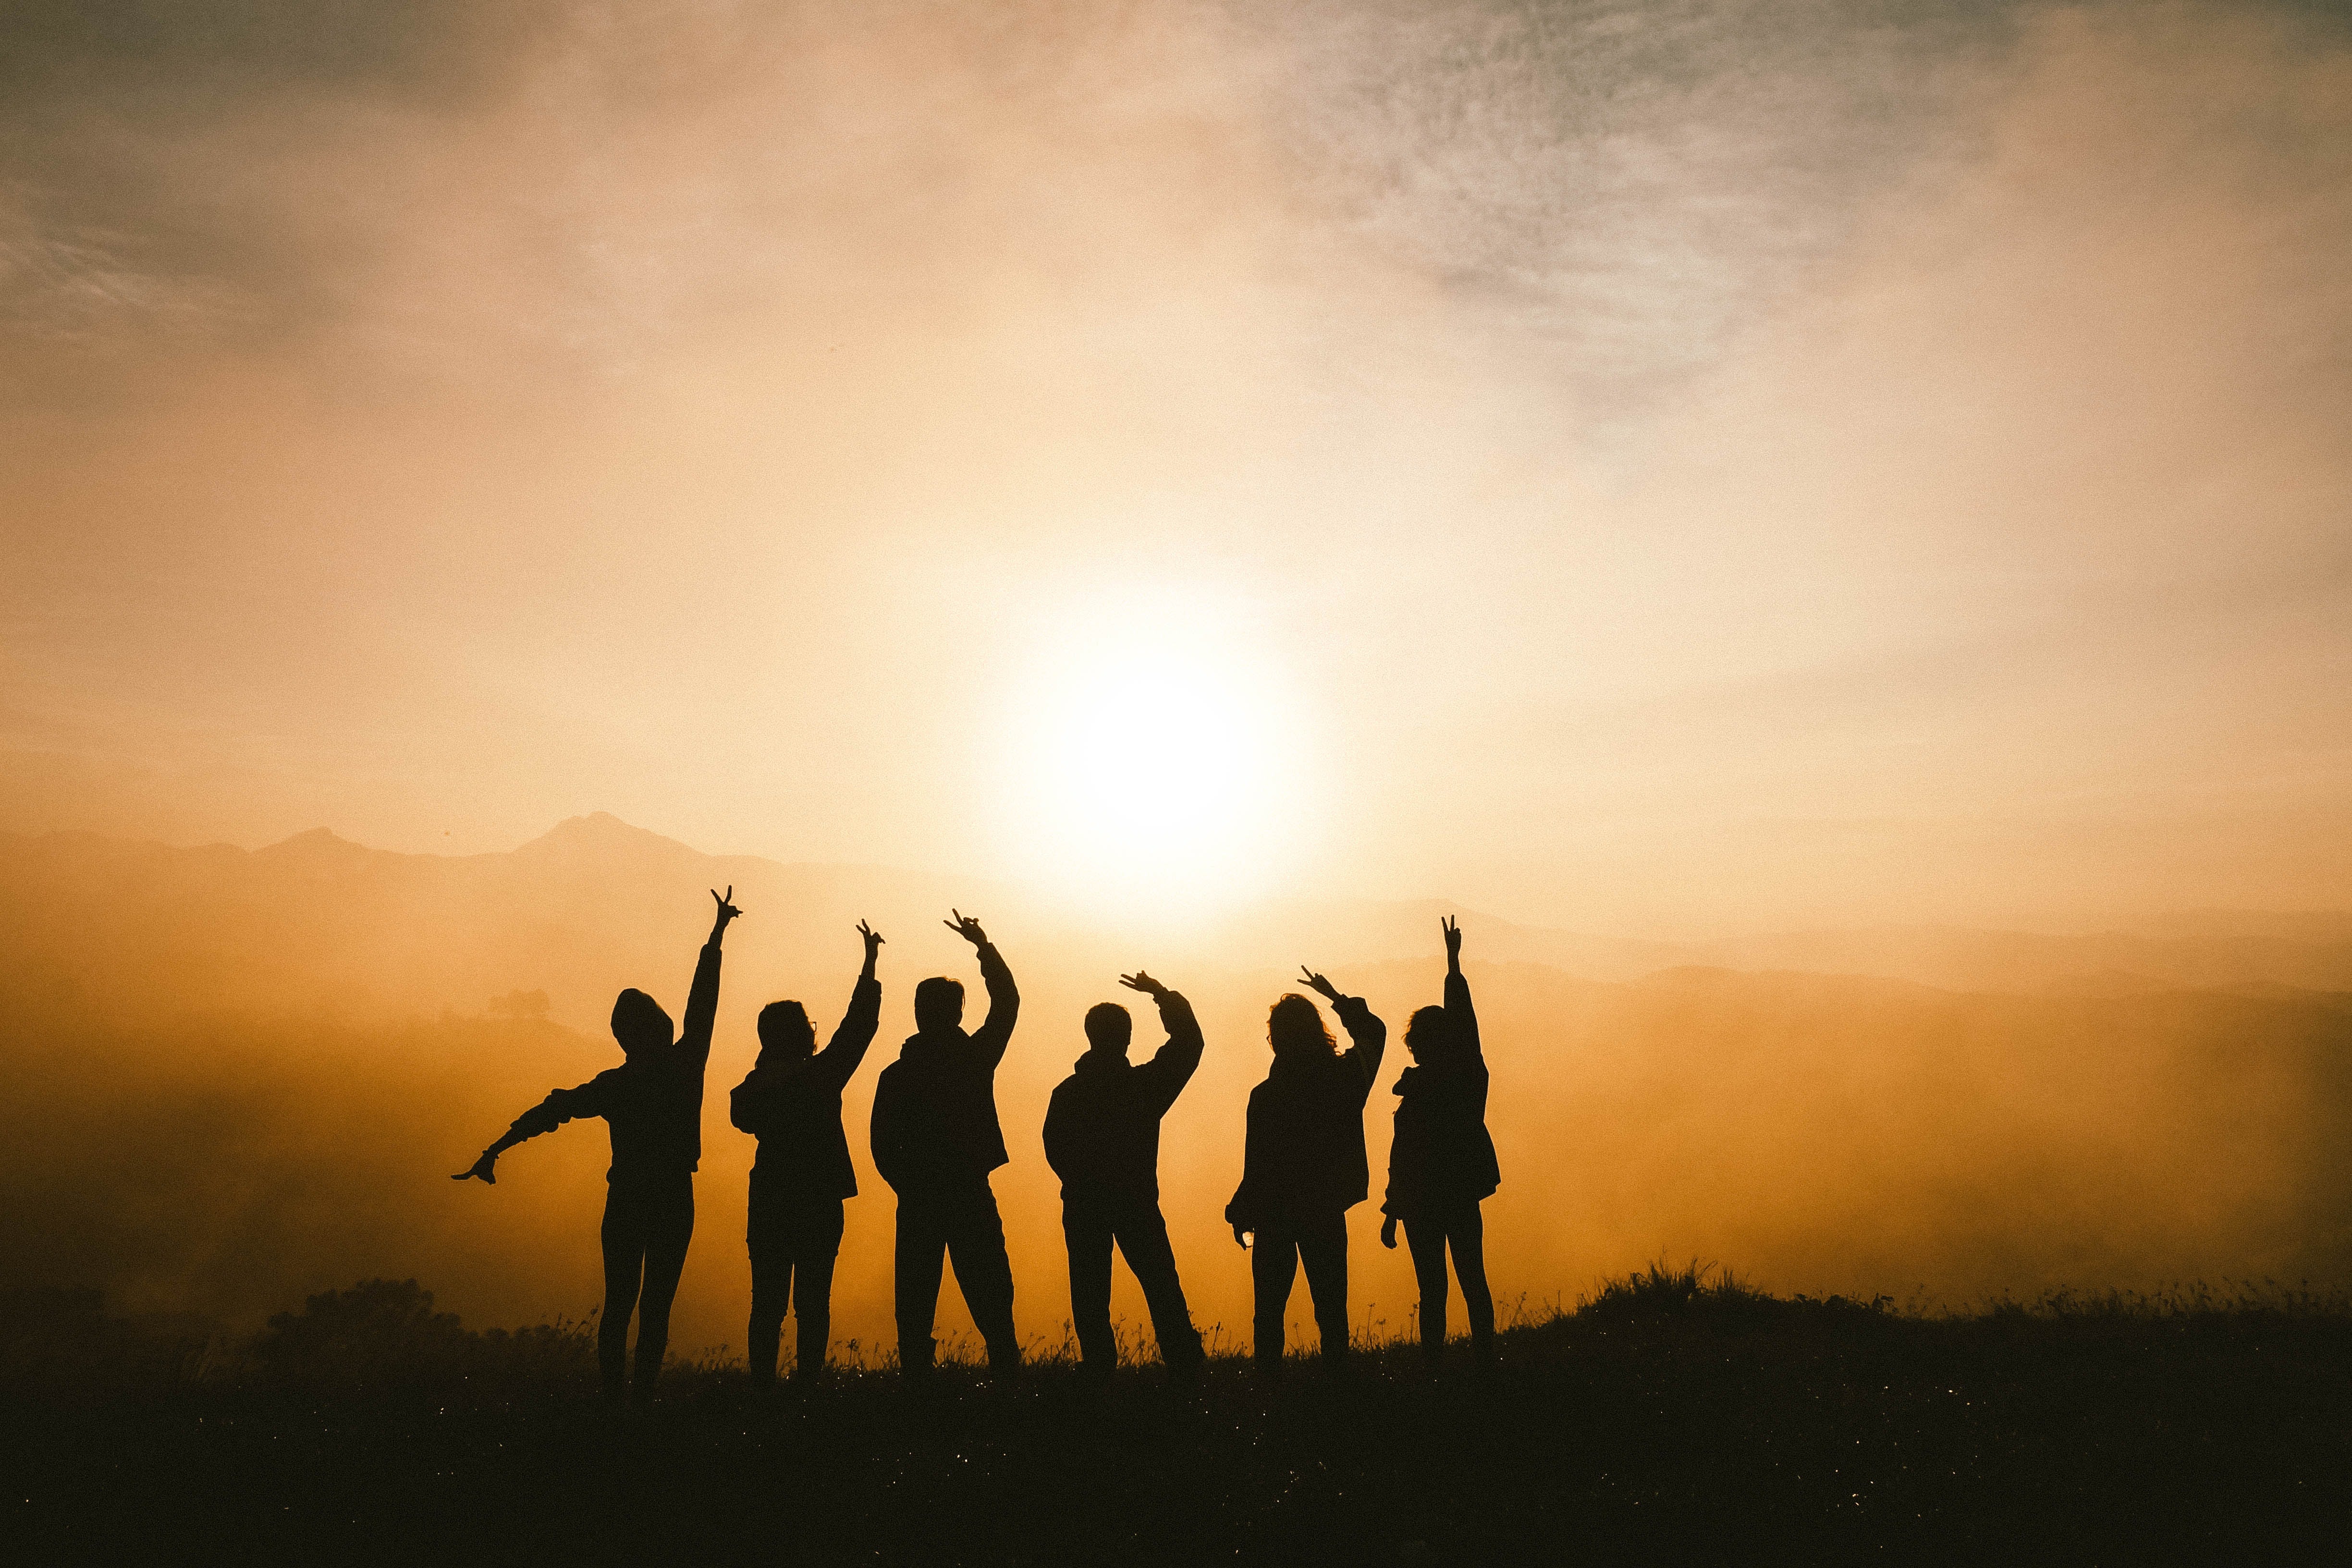 Group of people are silhouetted against the sun